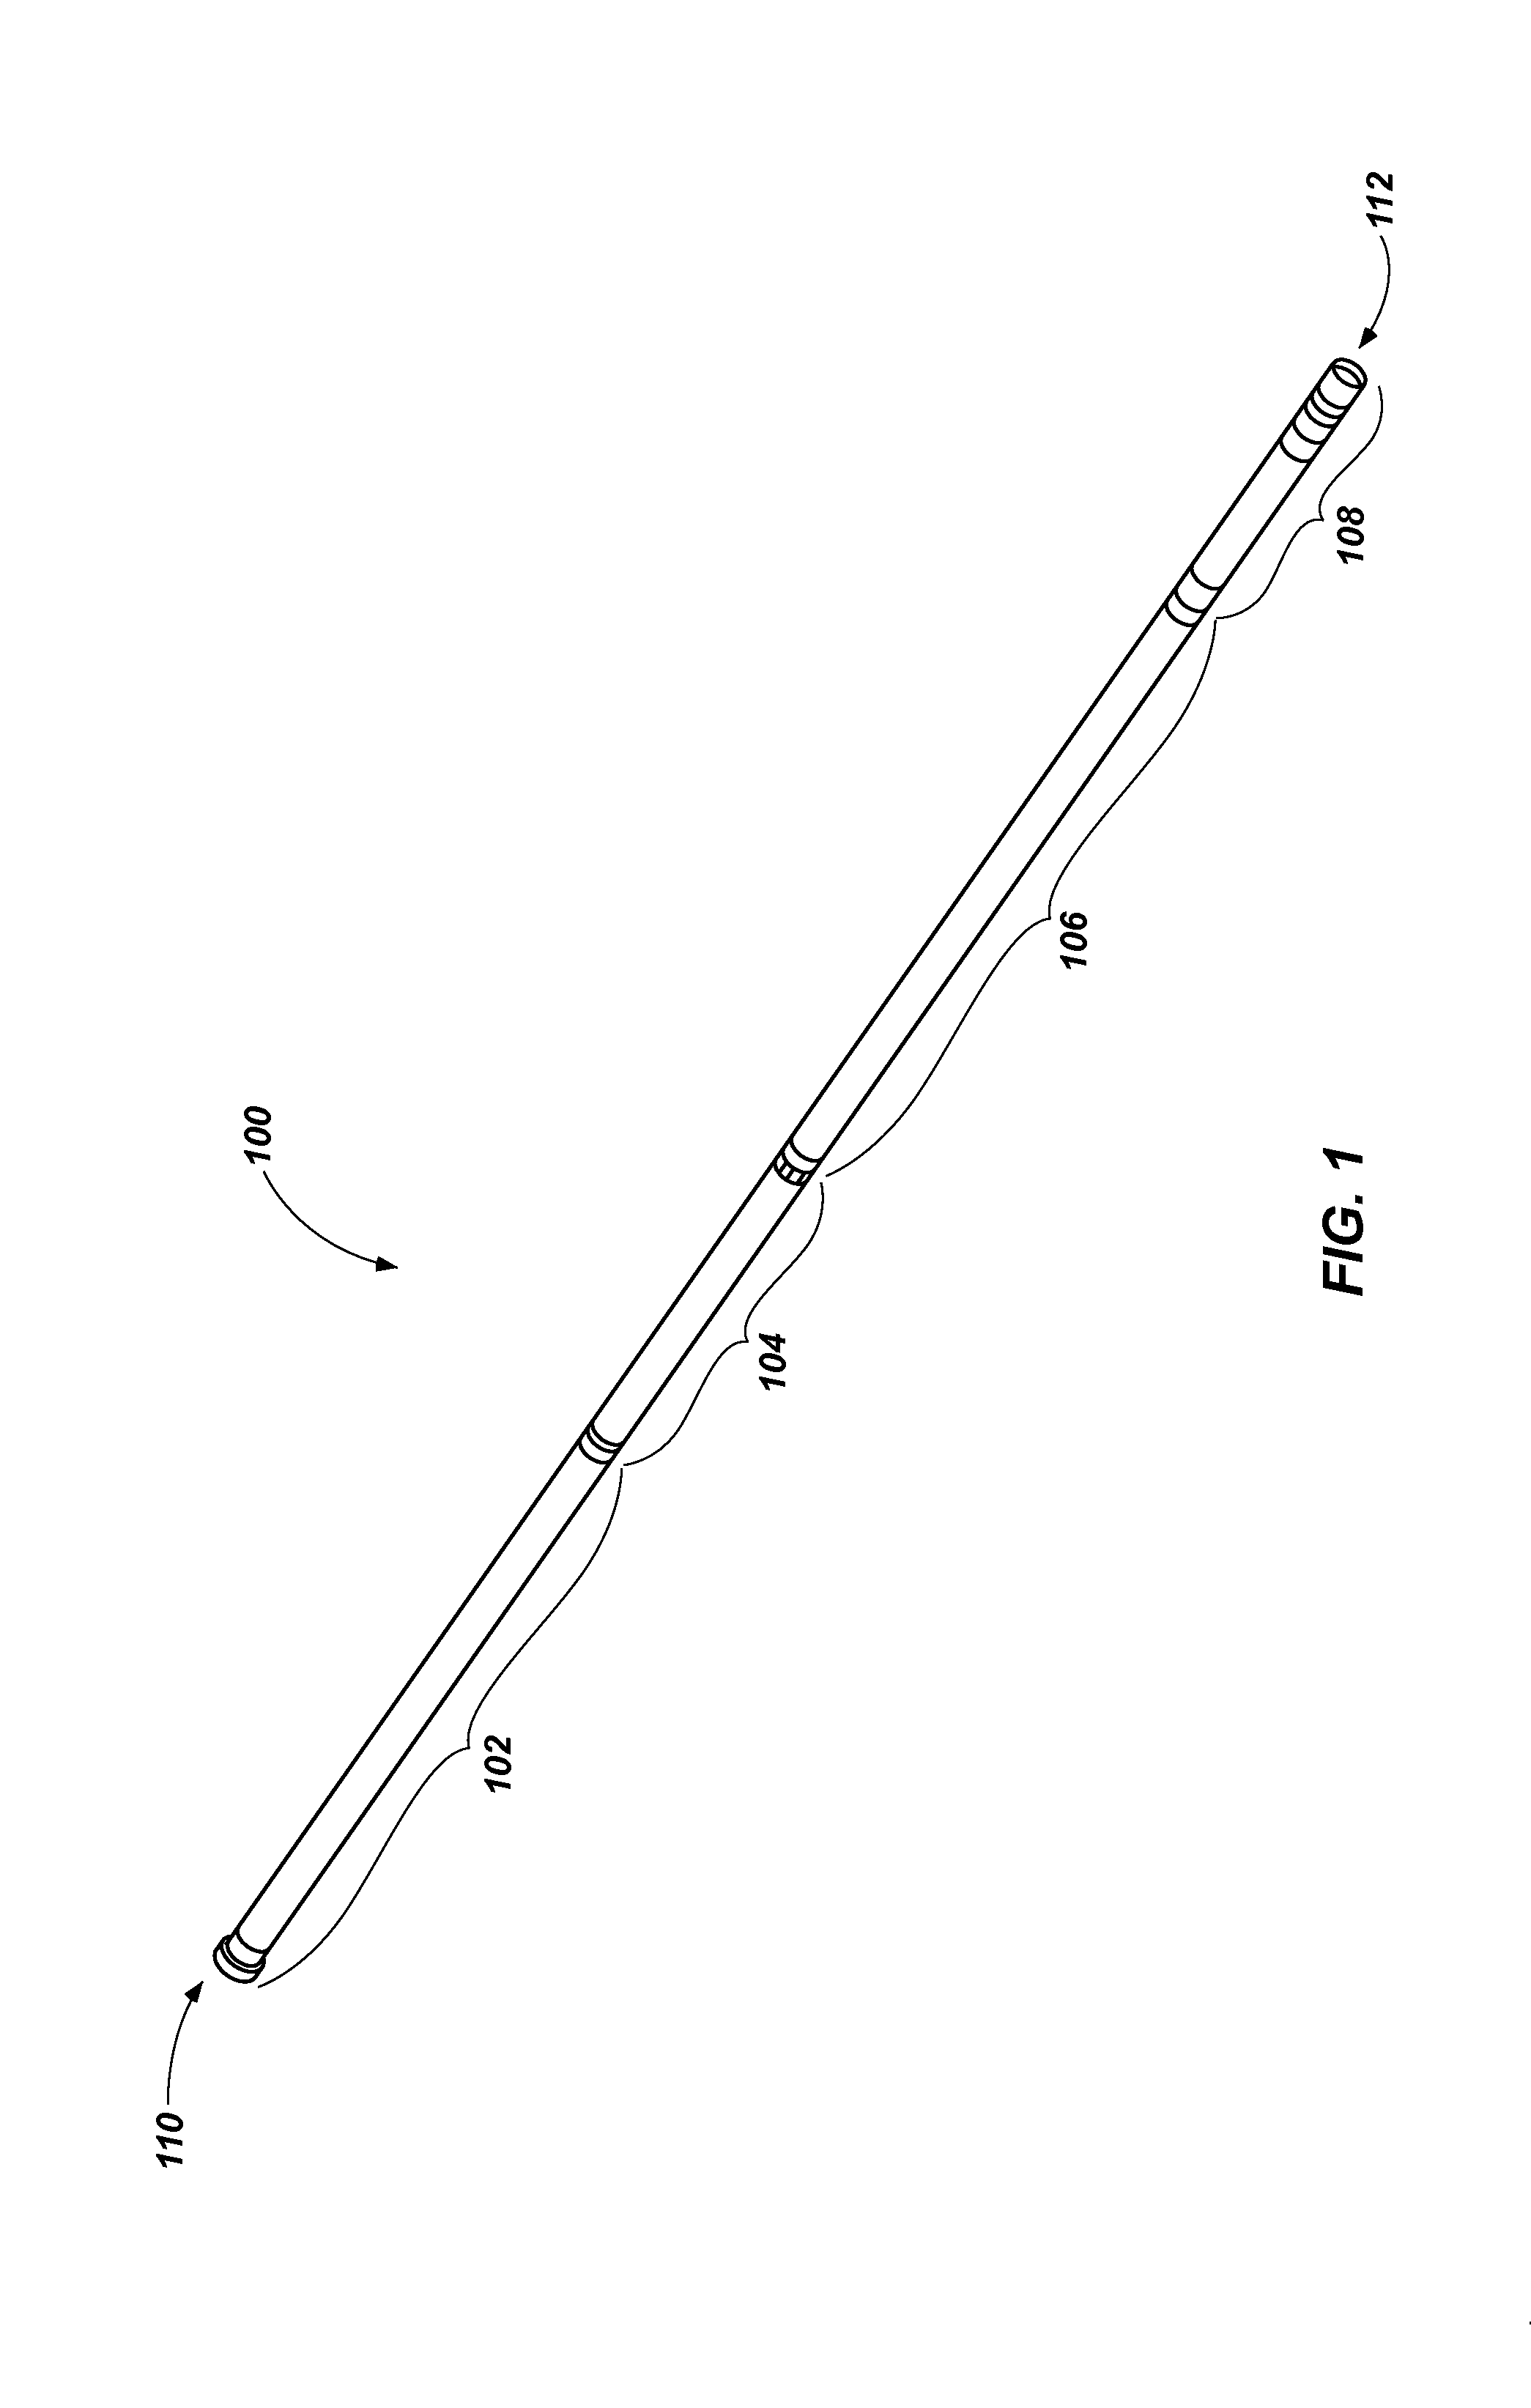 Wellbore tools with non-hydrocarbon-based greases and methods of making such wellbore tools